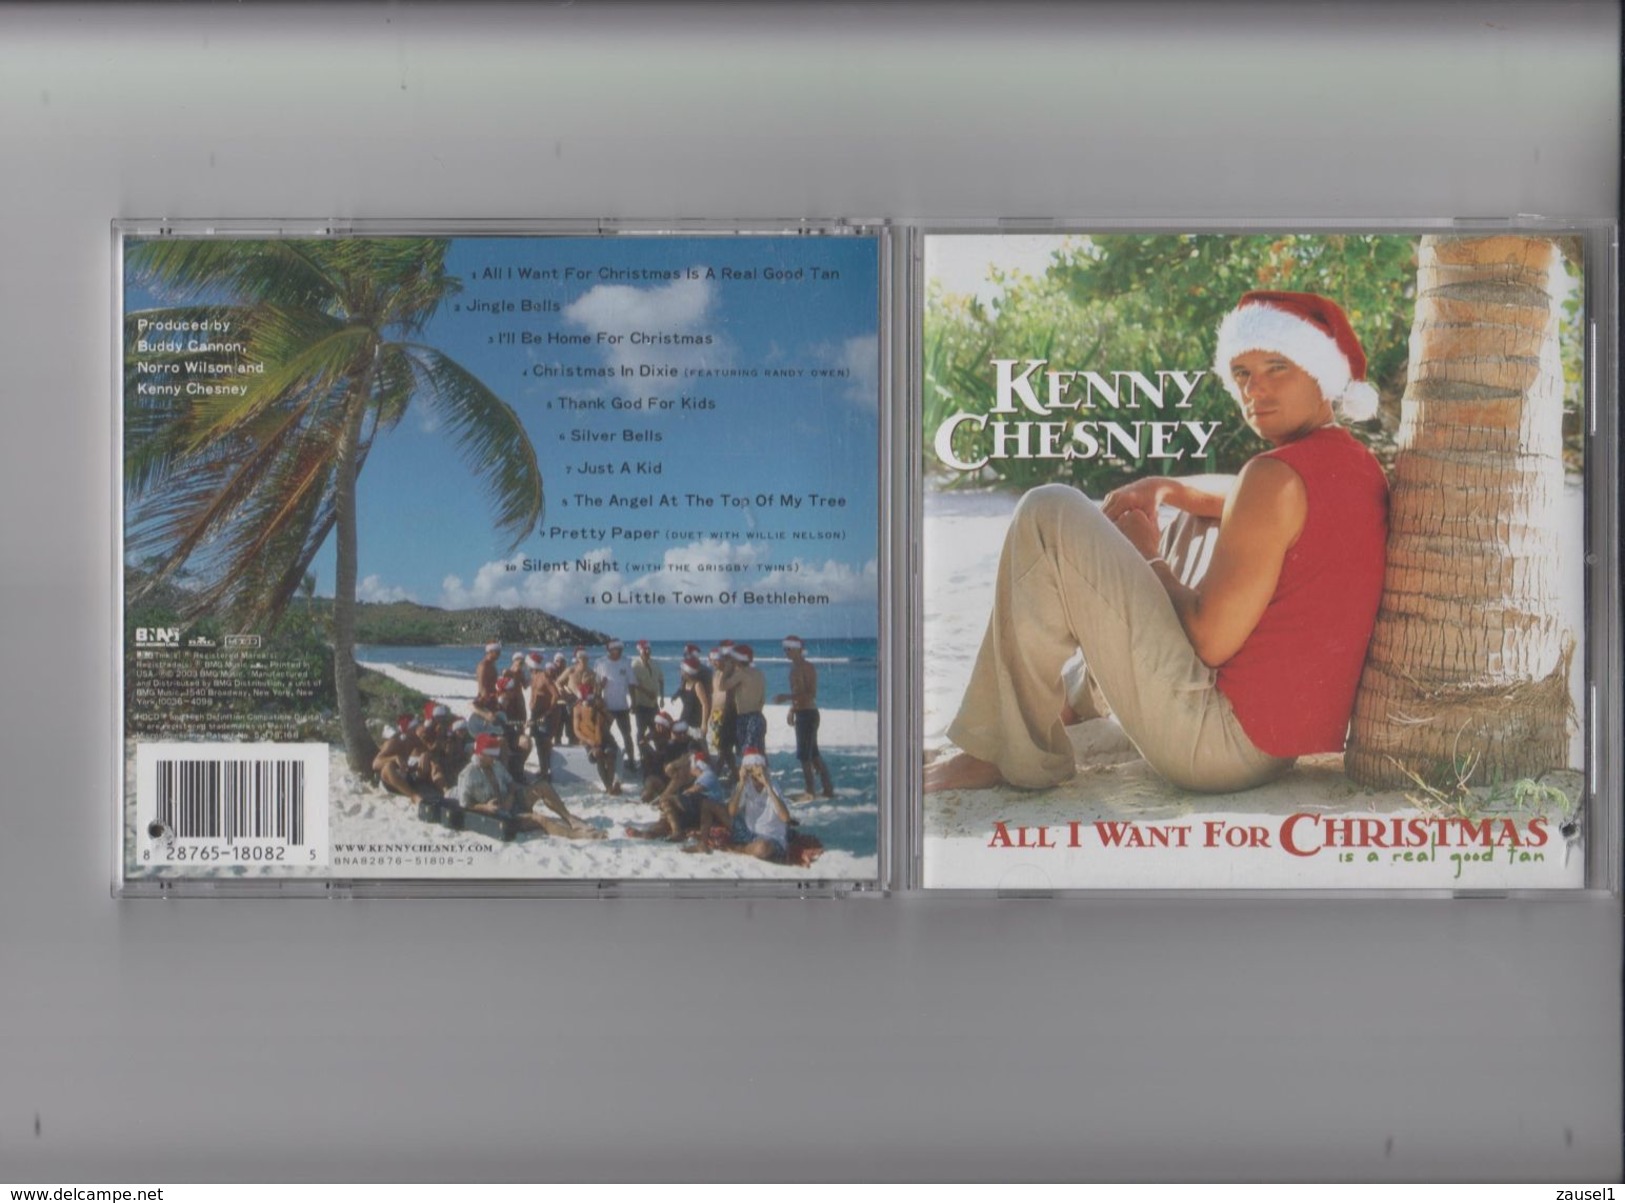 Kenny Chesney - All I Want For Christmas - Country- Original CD - Country & Folk